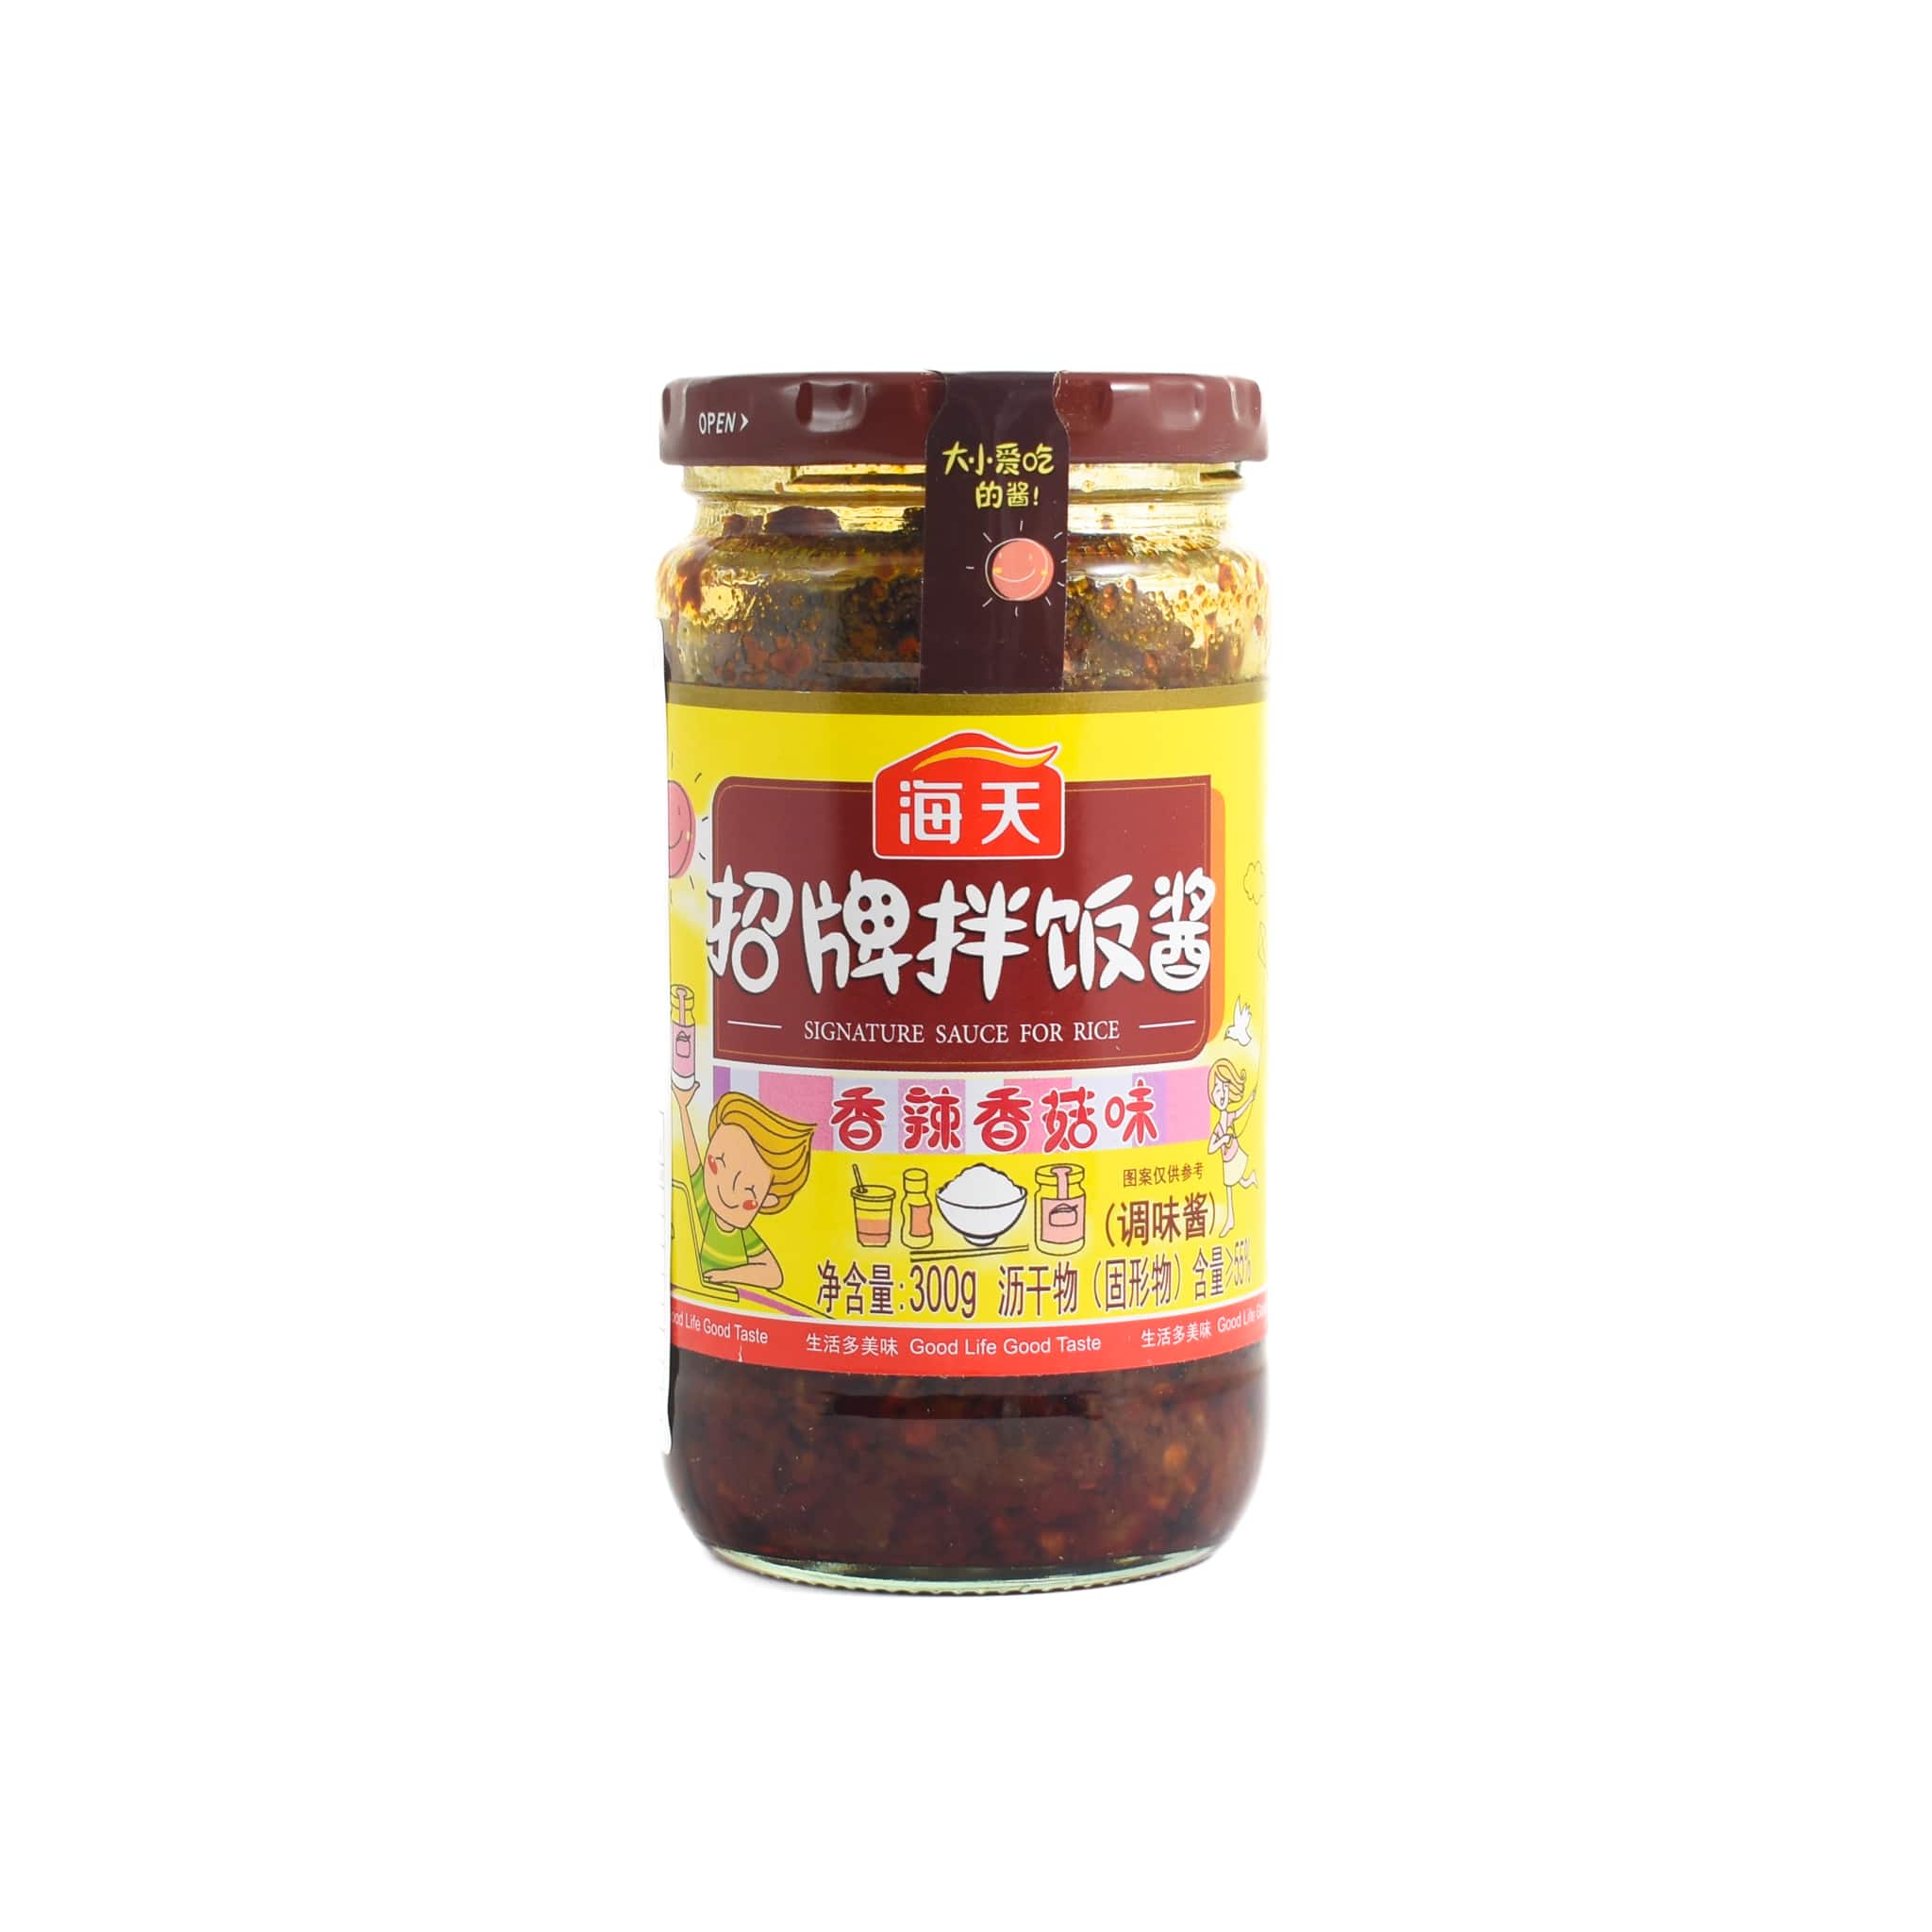 Haday Signature Sauce for Rice Dishes, 300g